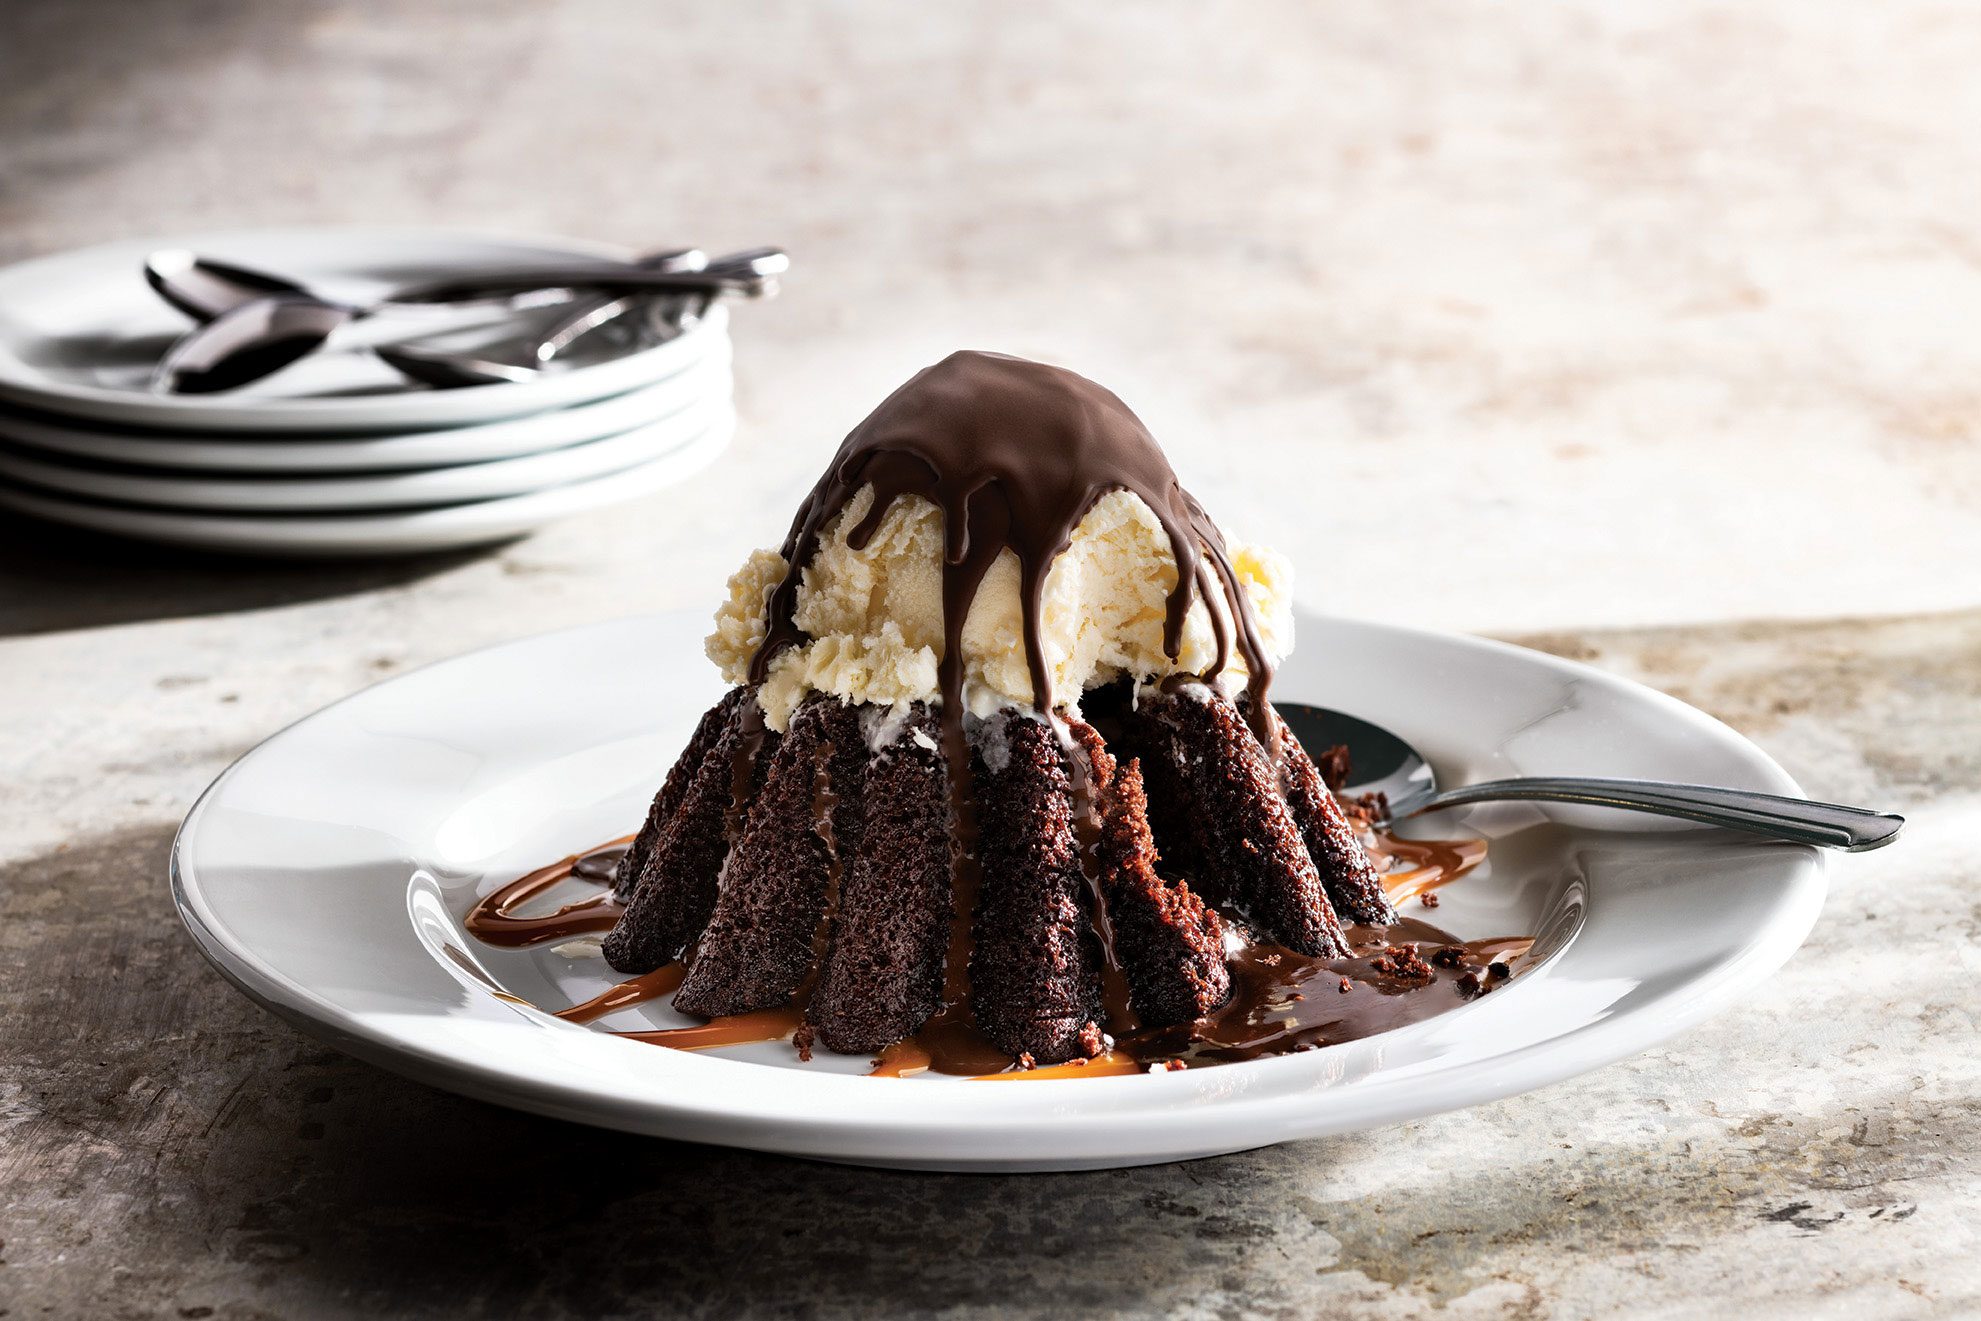 Who doesn’t love the sound of your spoon hitting the top of our Molten Chocolate Cake that’s sure to melt in your mouth? 